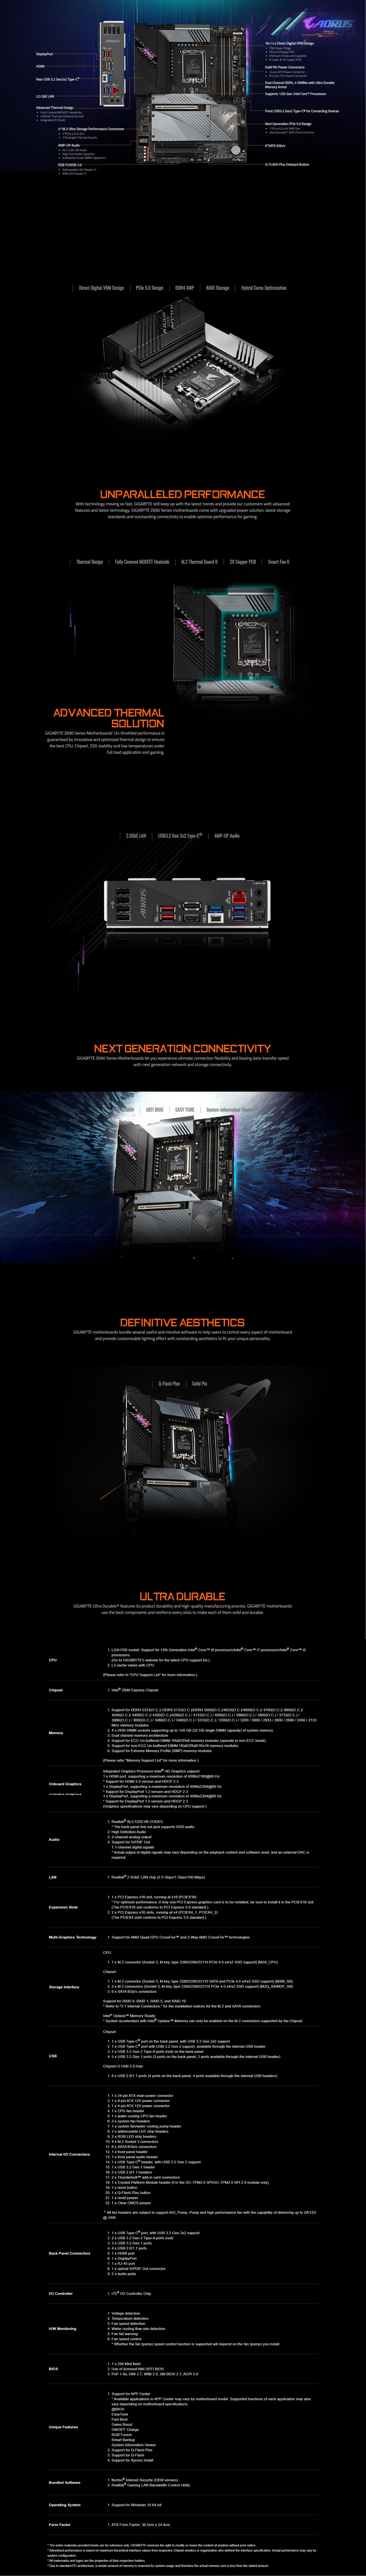 A large marketing image providing additional information about the product Gigabyte Z690 Aorus Elite DDR4 LGA1700 ATX Desktop Motherboard - Additional alt info not provided